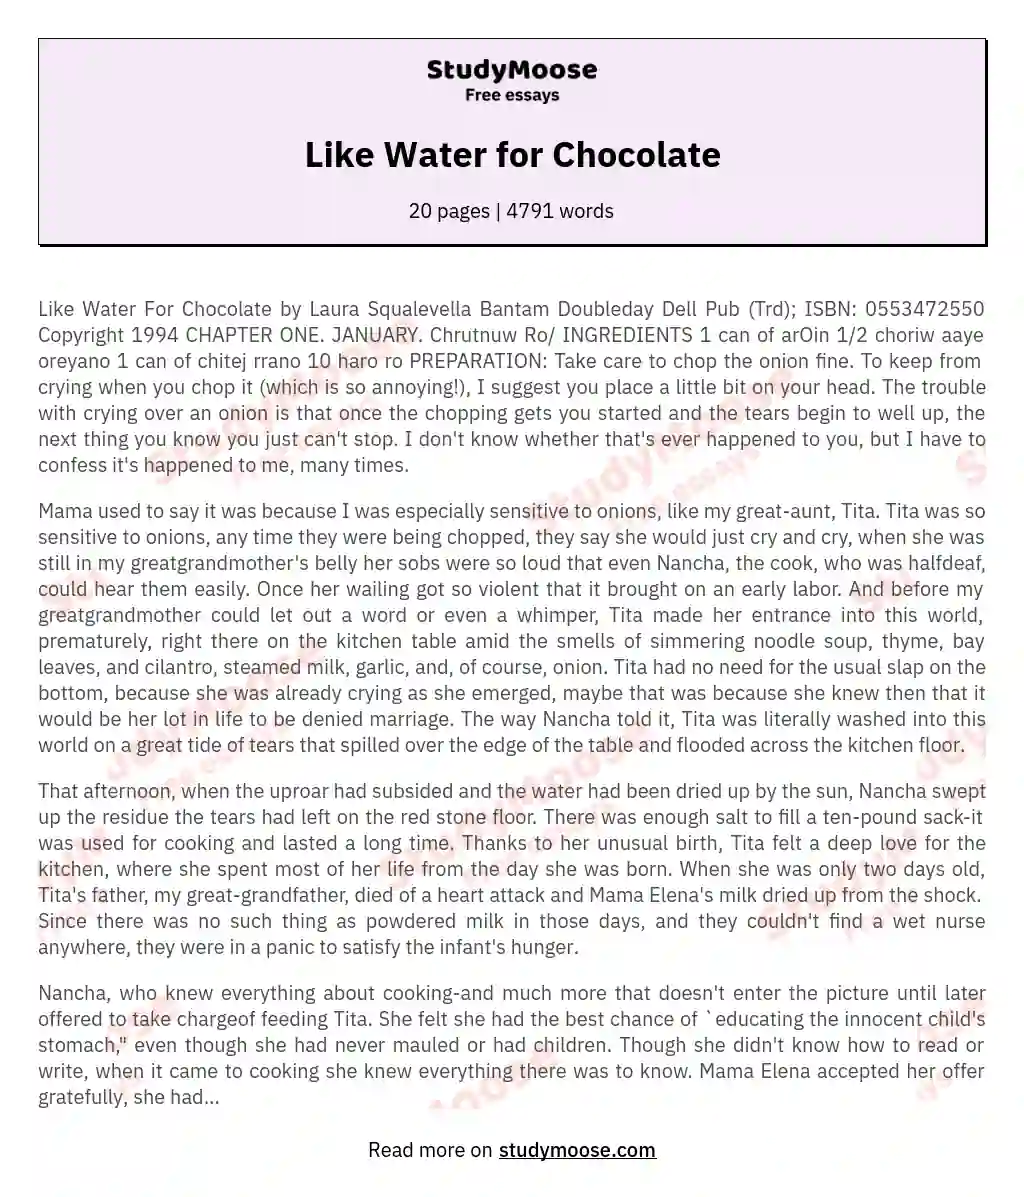 Like Water for Chocolate essay